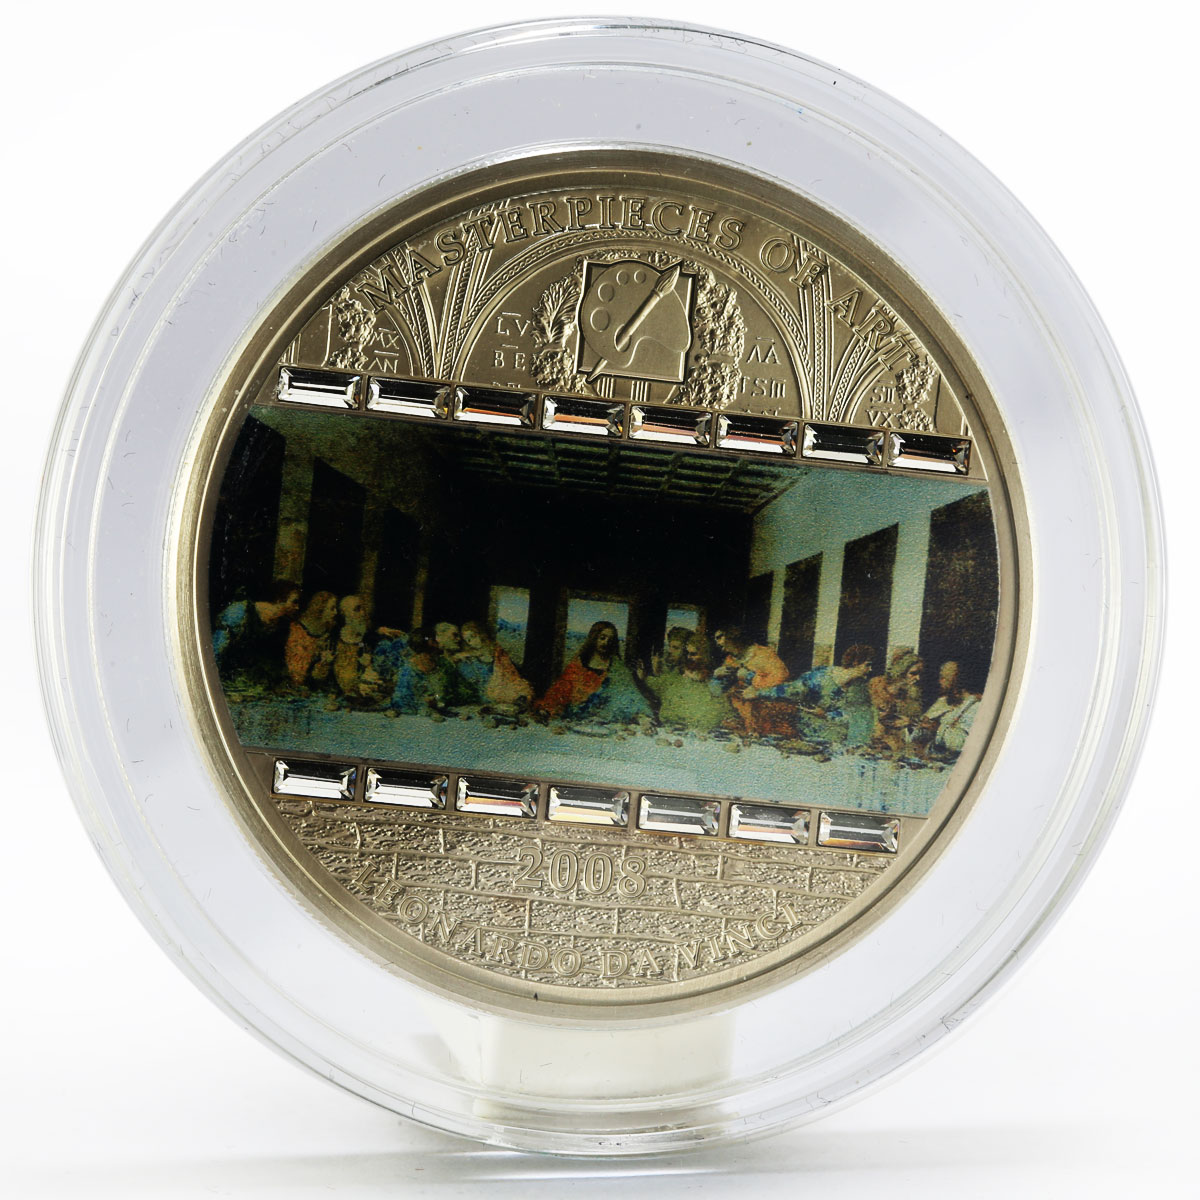 Cook Islands 20 dollars The Last Supper Art with Crystals silver coin 2008